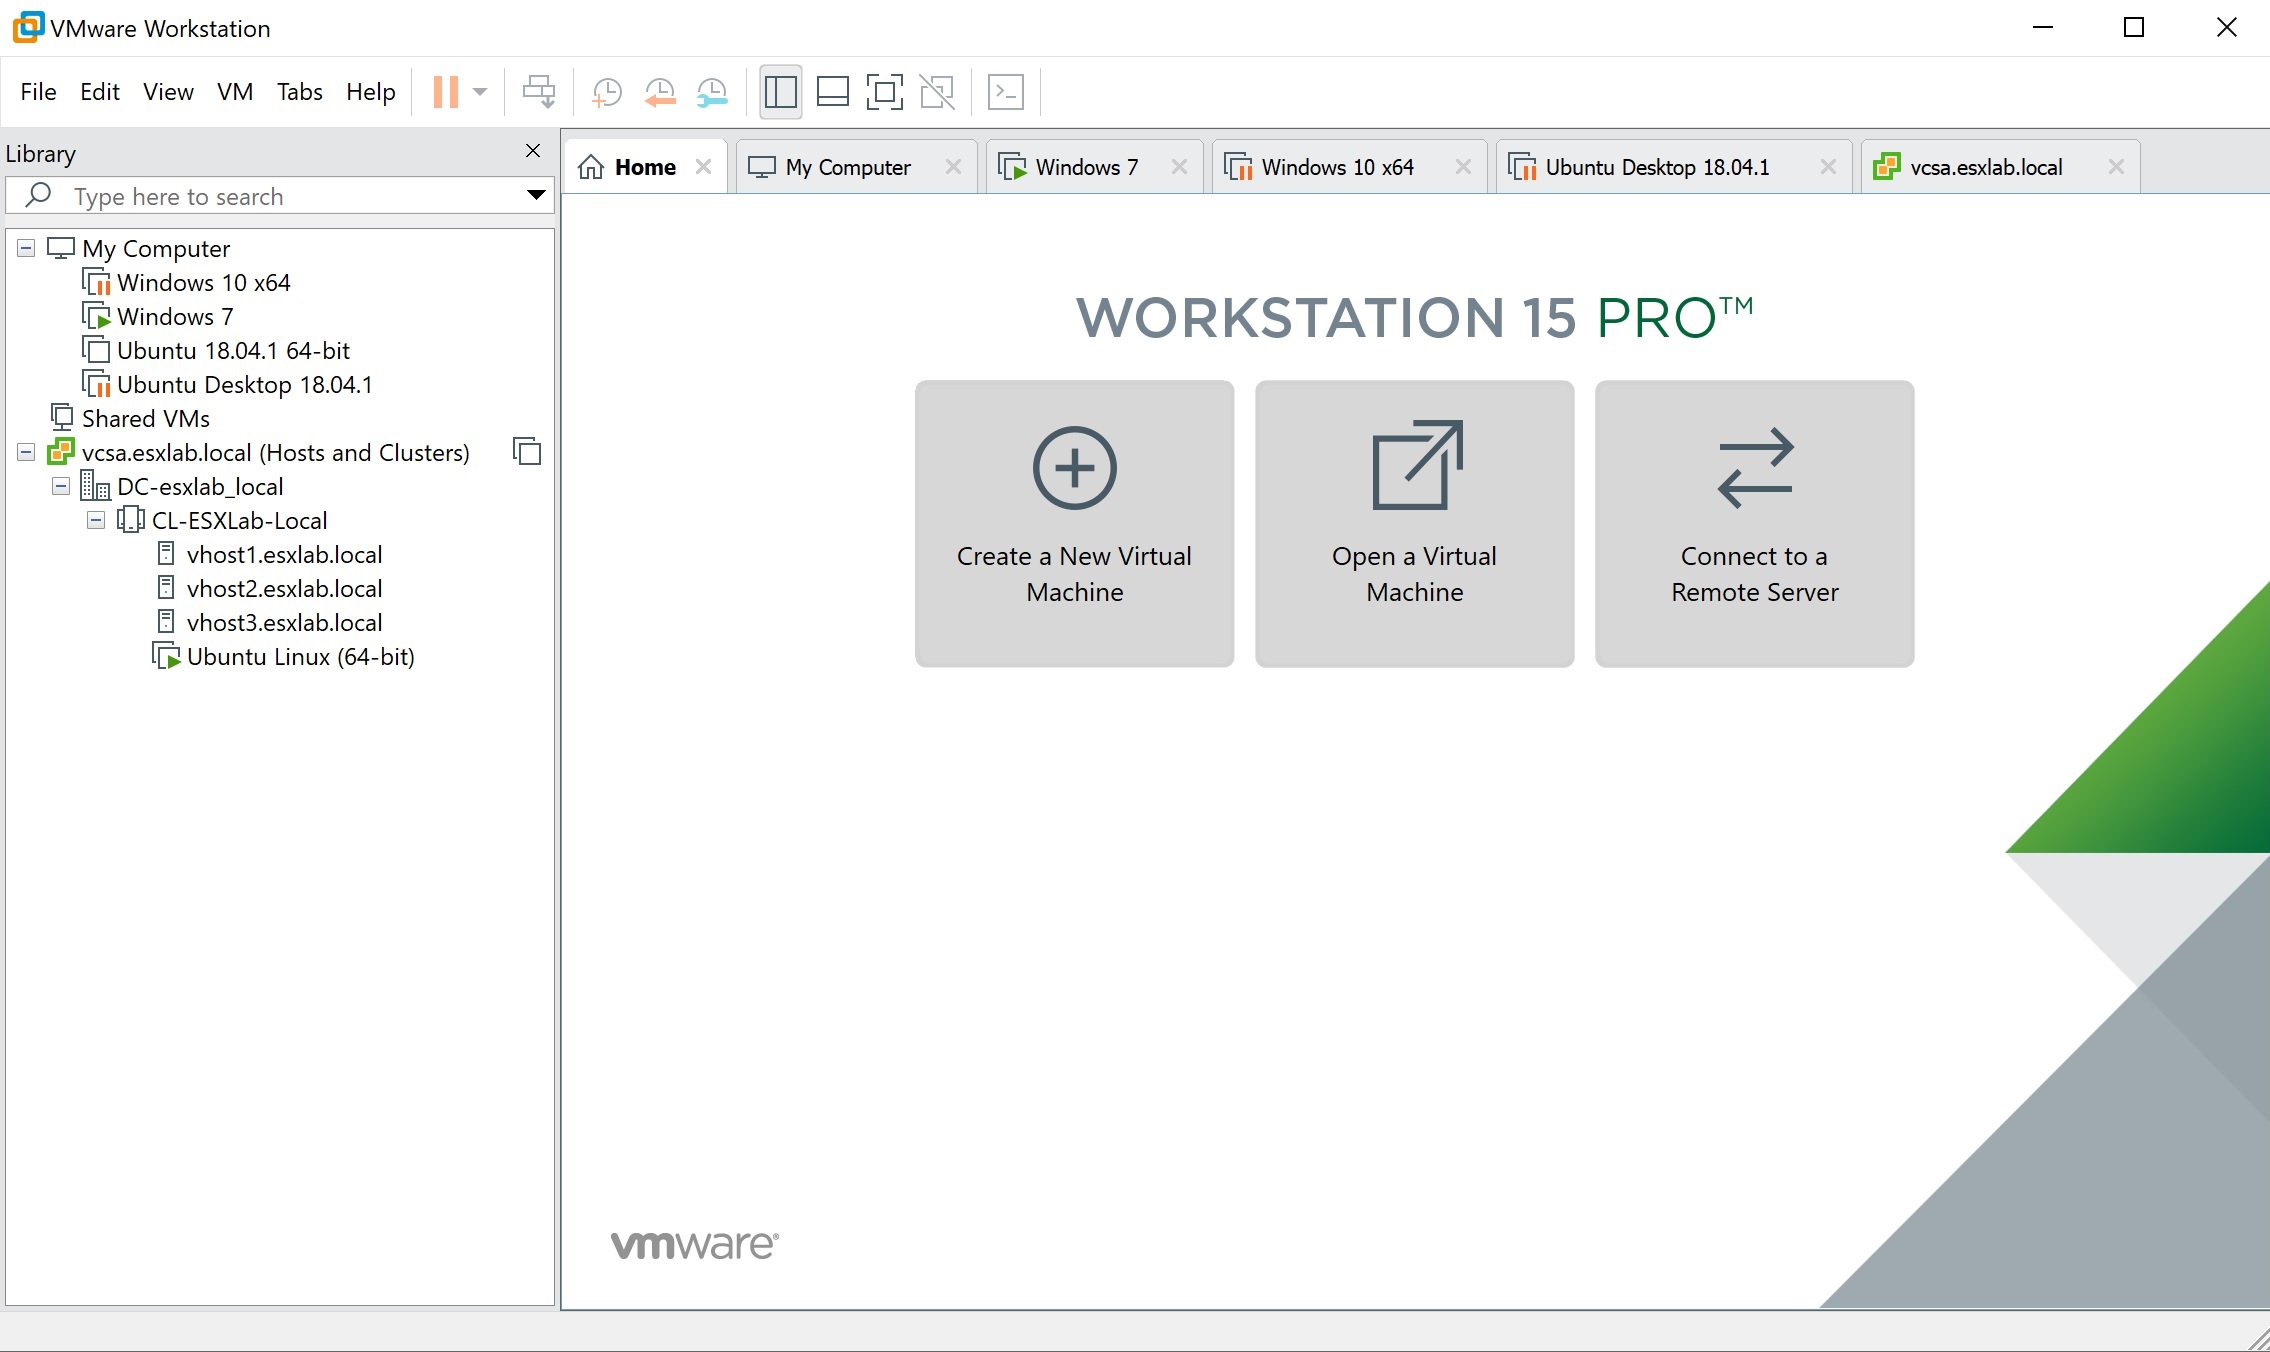 vmware workstation 7 download free for xp